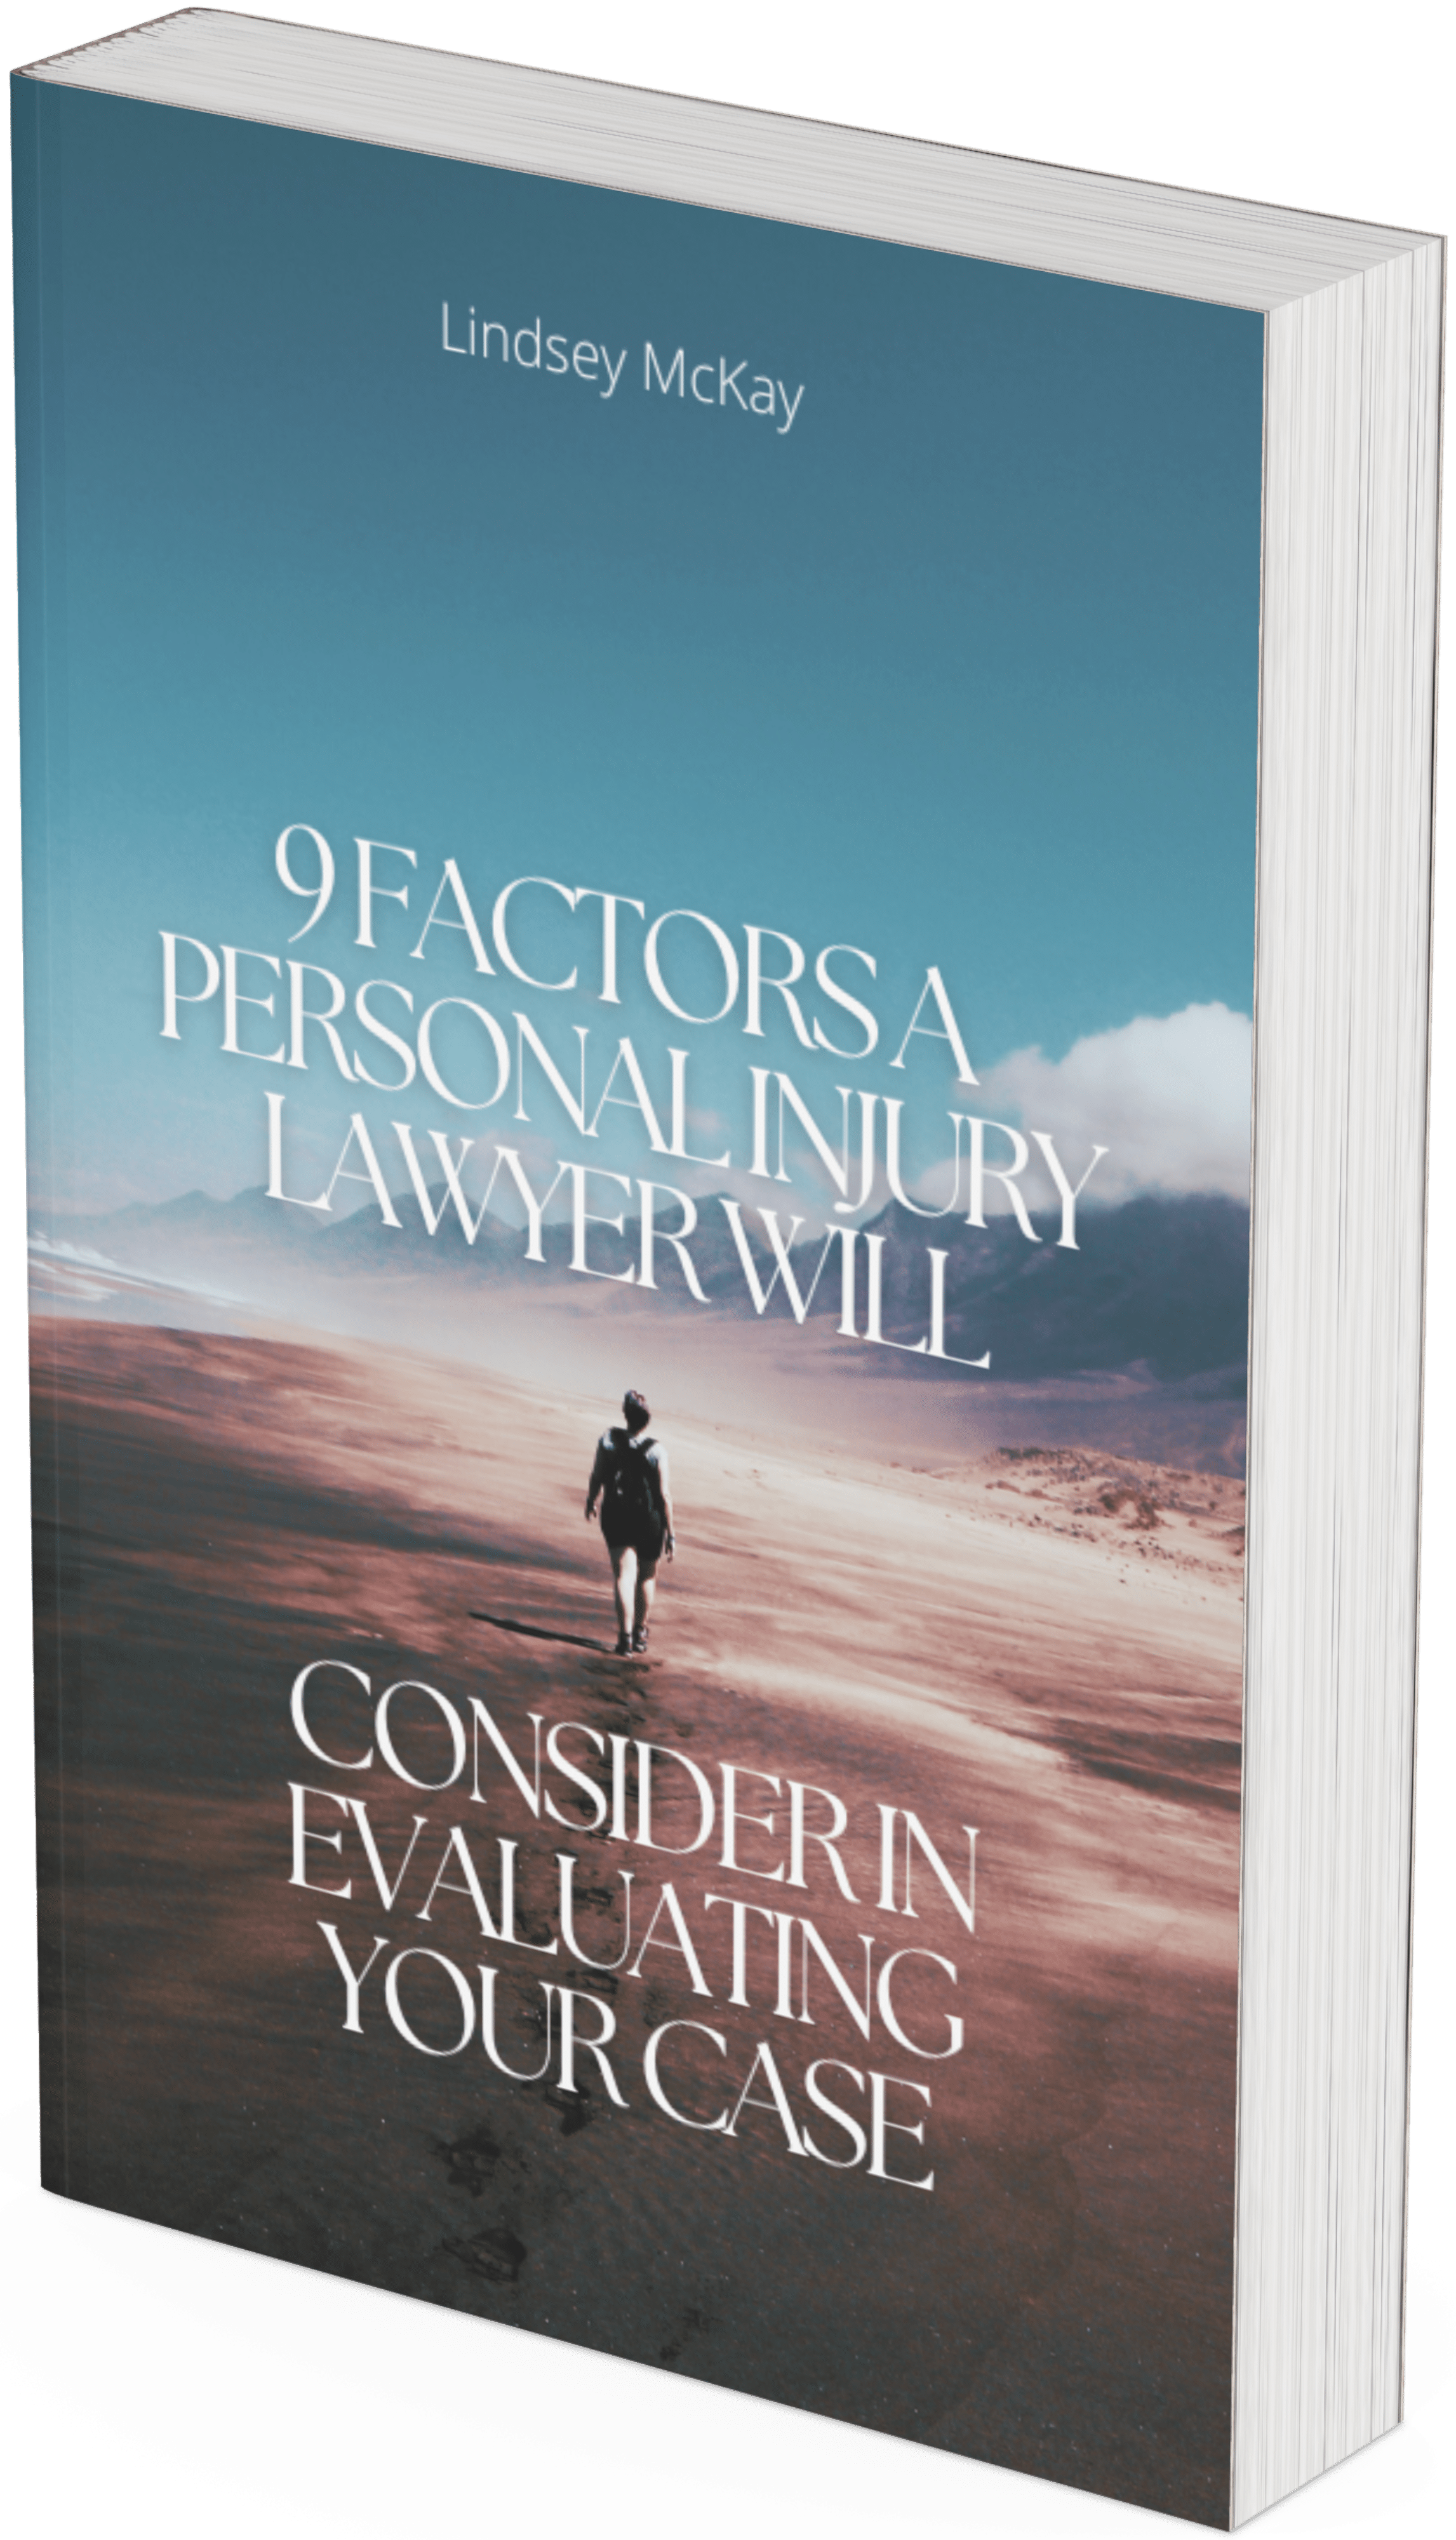 9 Factors a Personal Injury Lawyer Will Consider in Evaluating Your Case​